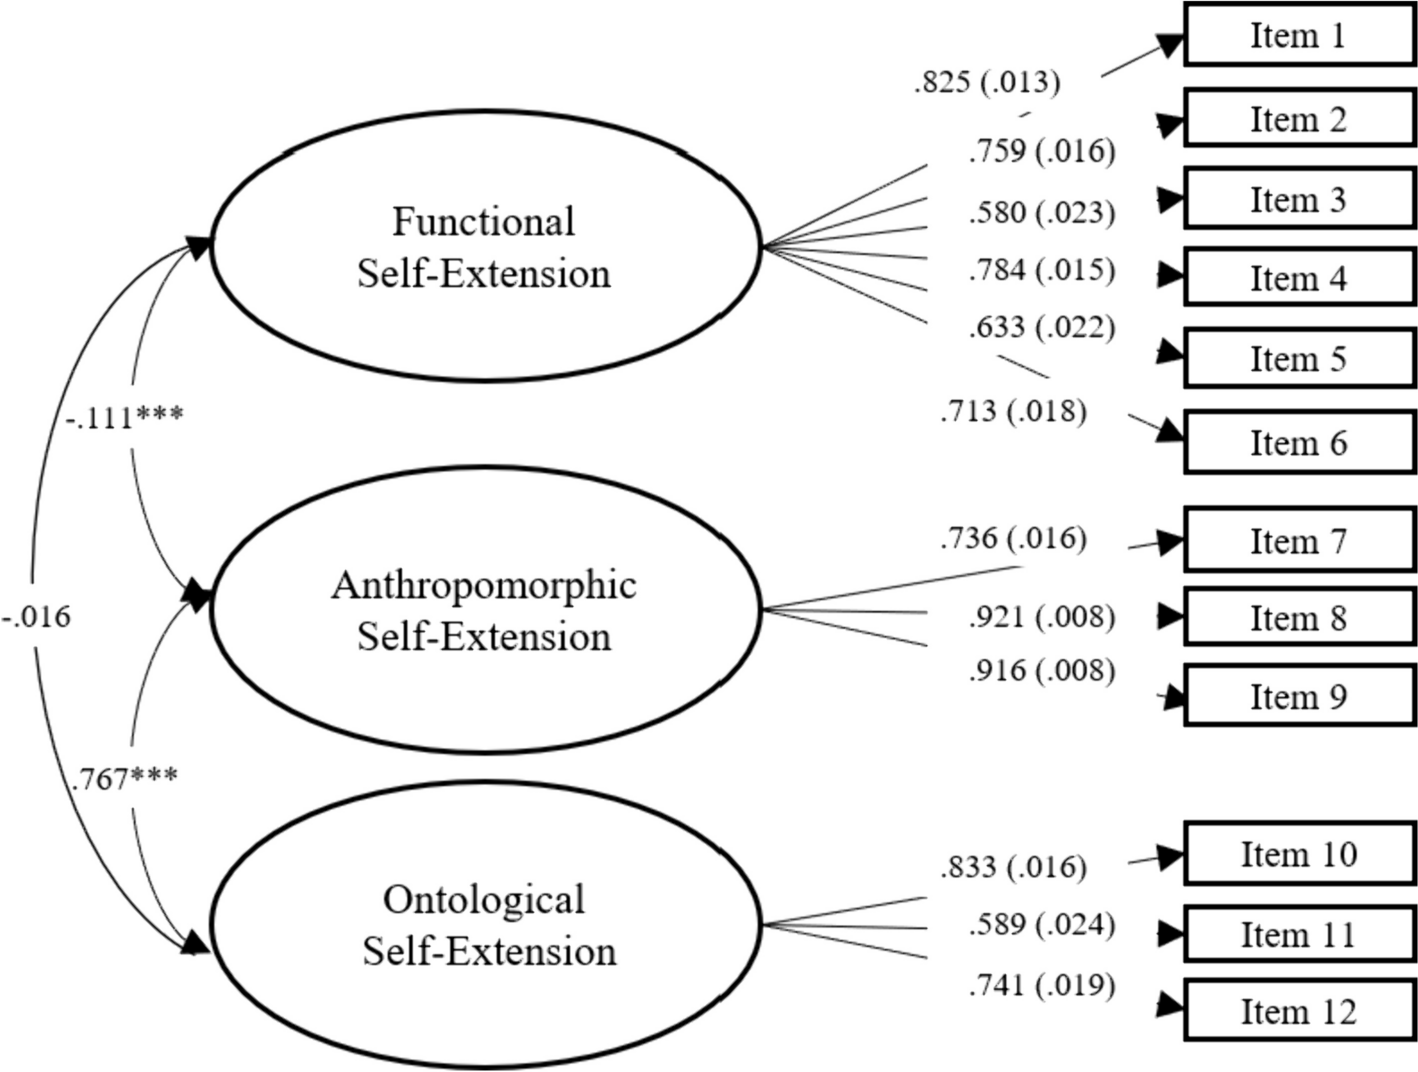 Validation of the Chinese Version of the Smartphone Self-Extension Scale: Empirical Evidence for Tripartite Conceptualization of Smartphone Self-Extension